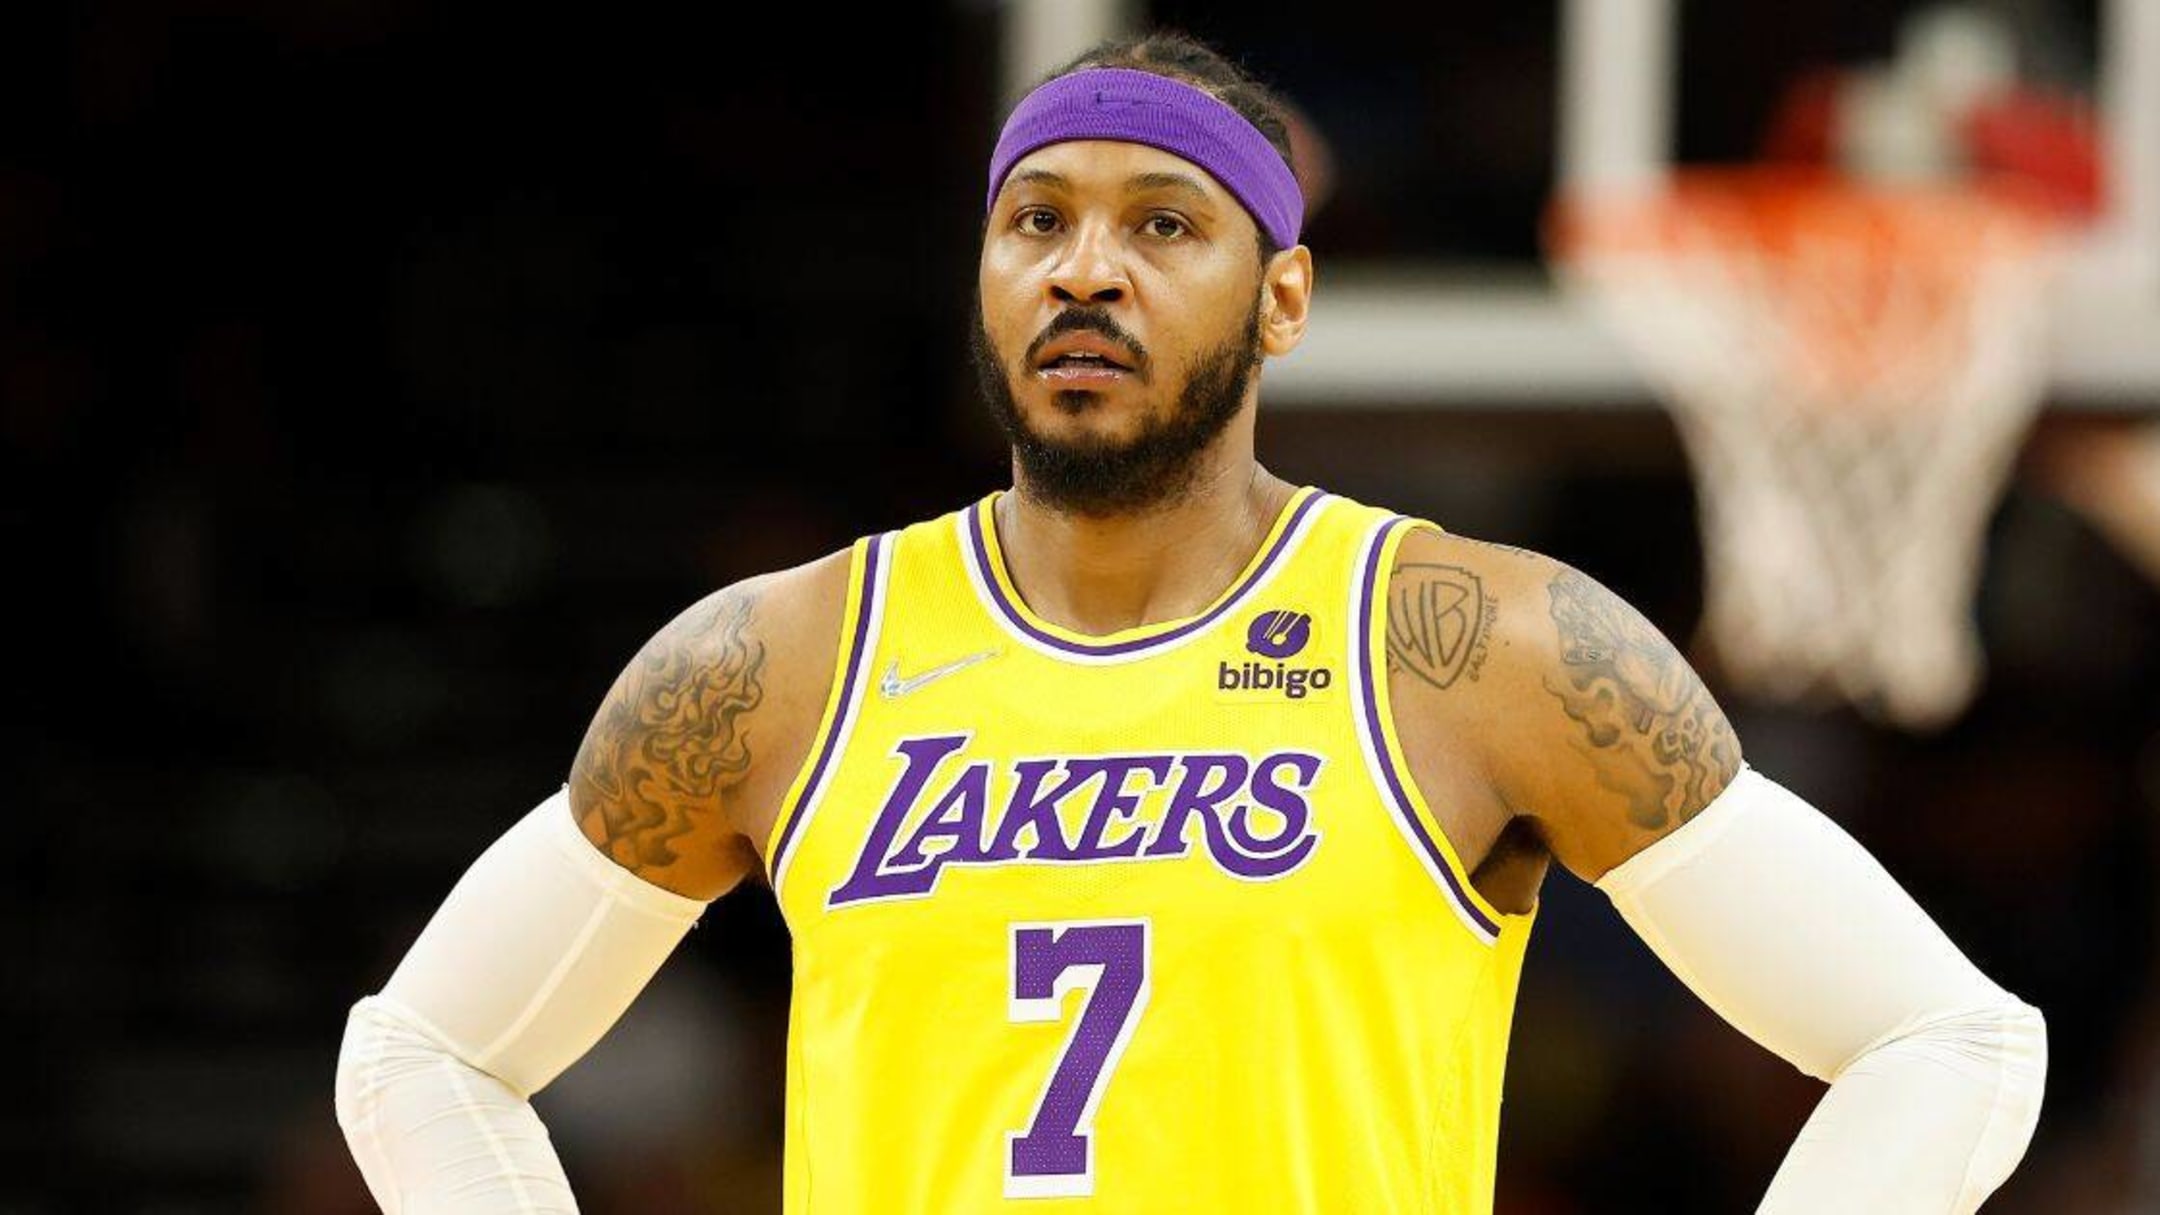 After 19 seasons, Carmelo Anthony officially retires from NBA